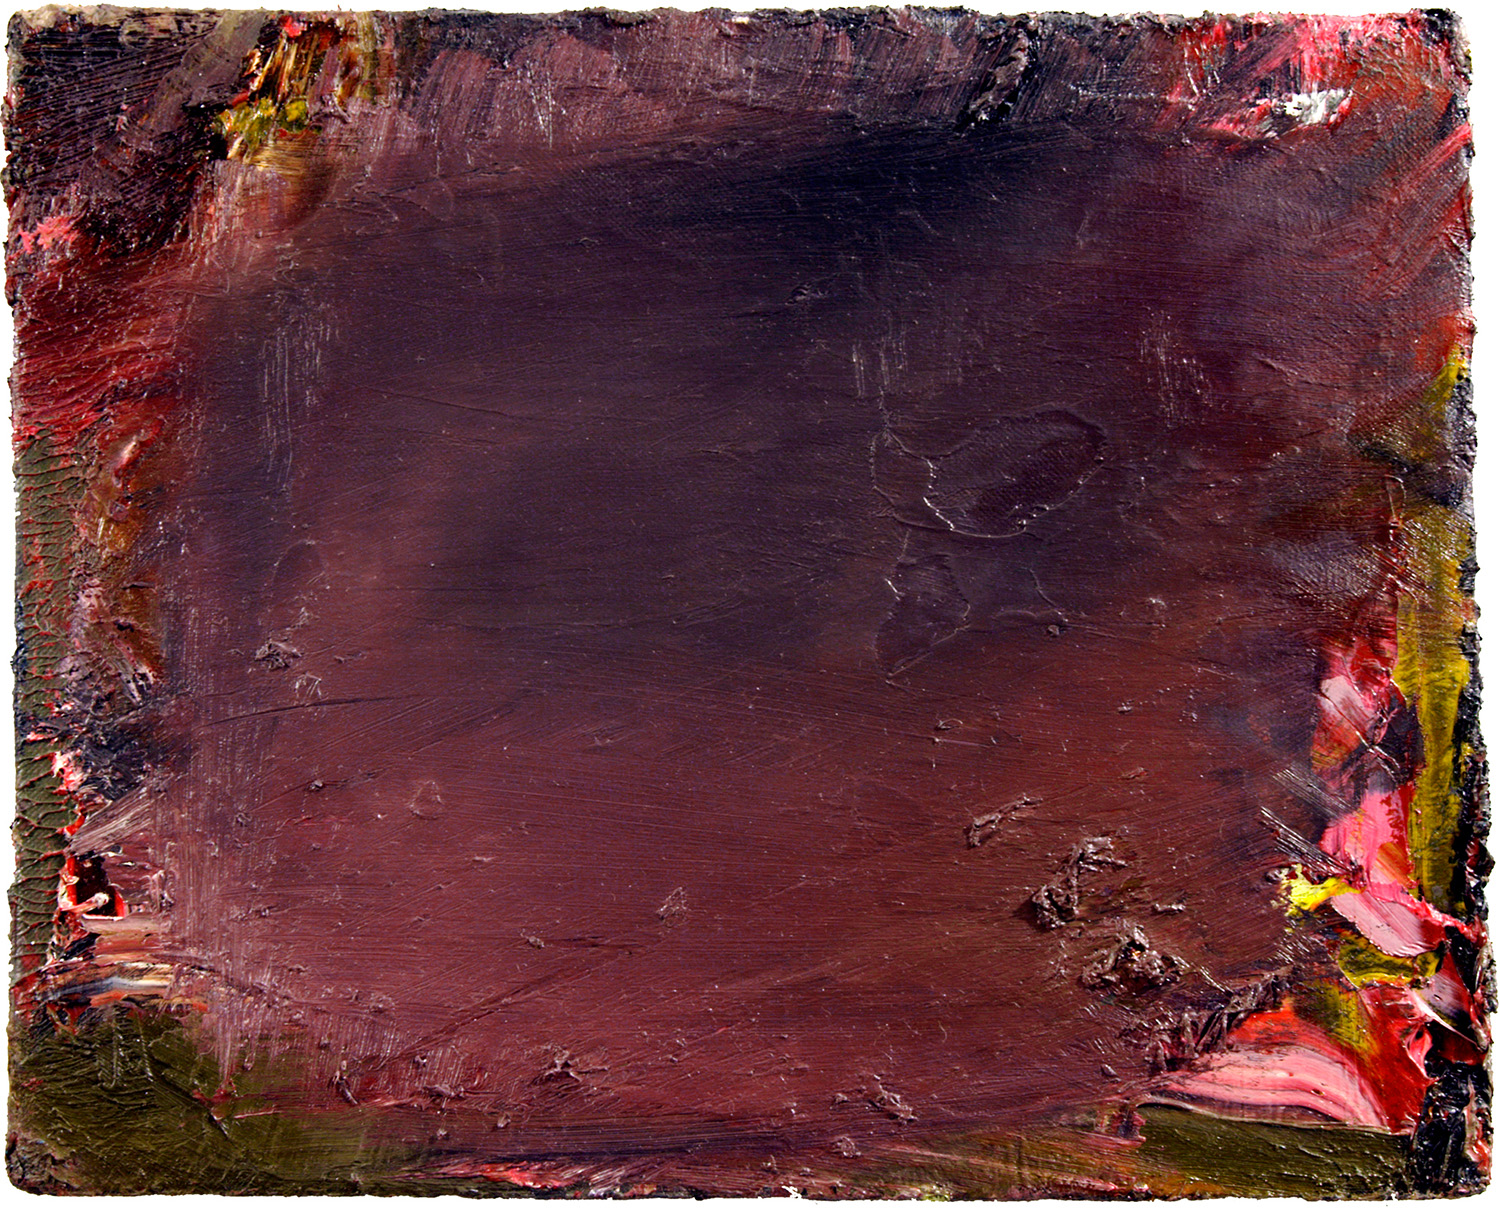   Mud Puff , 2006, oil on canvas, 8 x 10 inches 